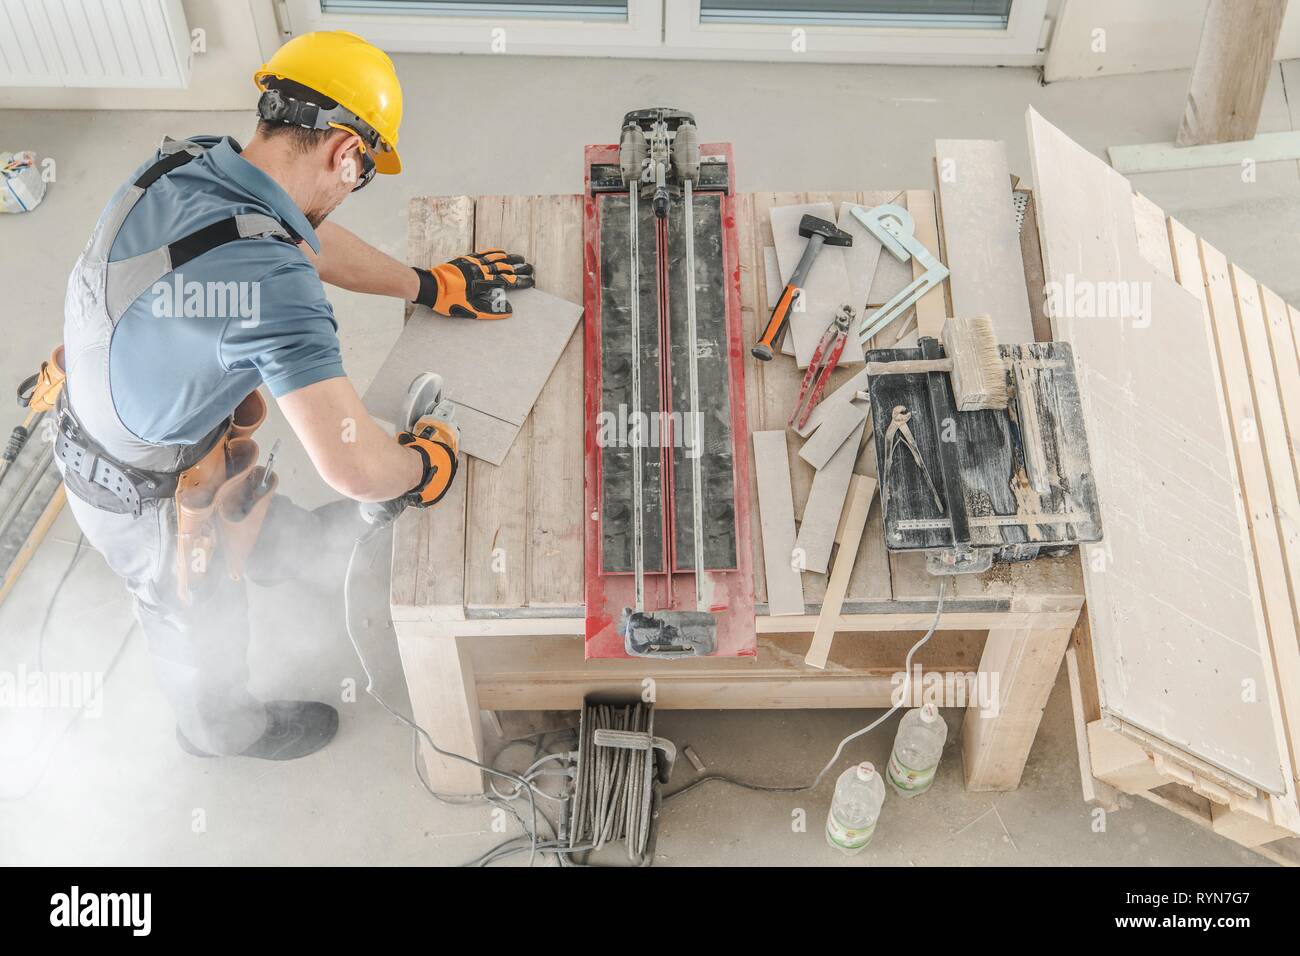 Caucasian Construction Worker and His Workplace. Men Cutting Ceramic Tiles. Stock Photo